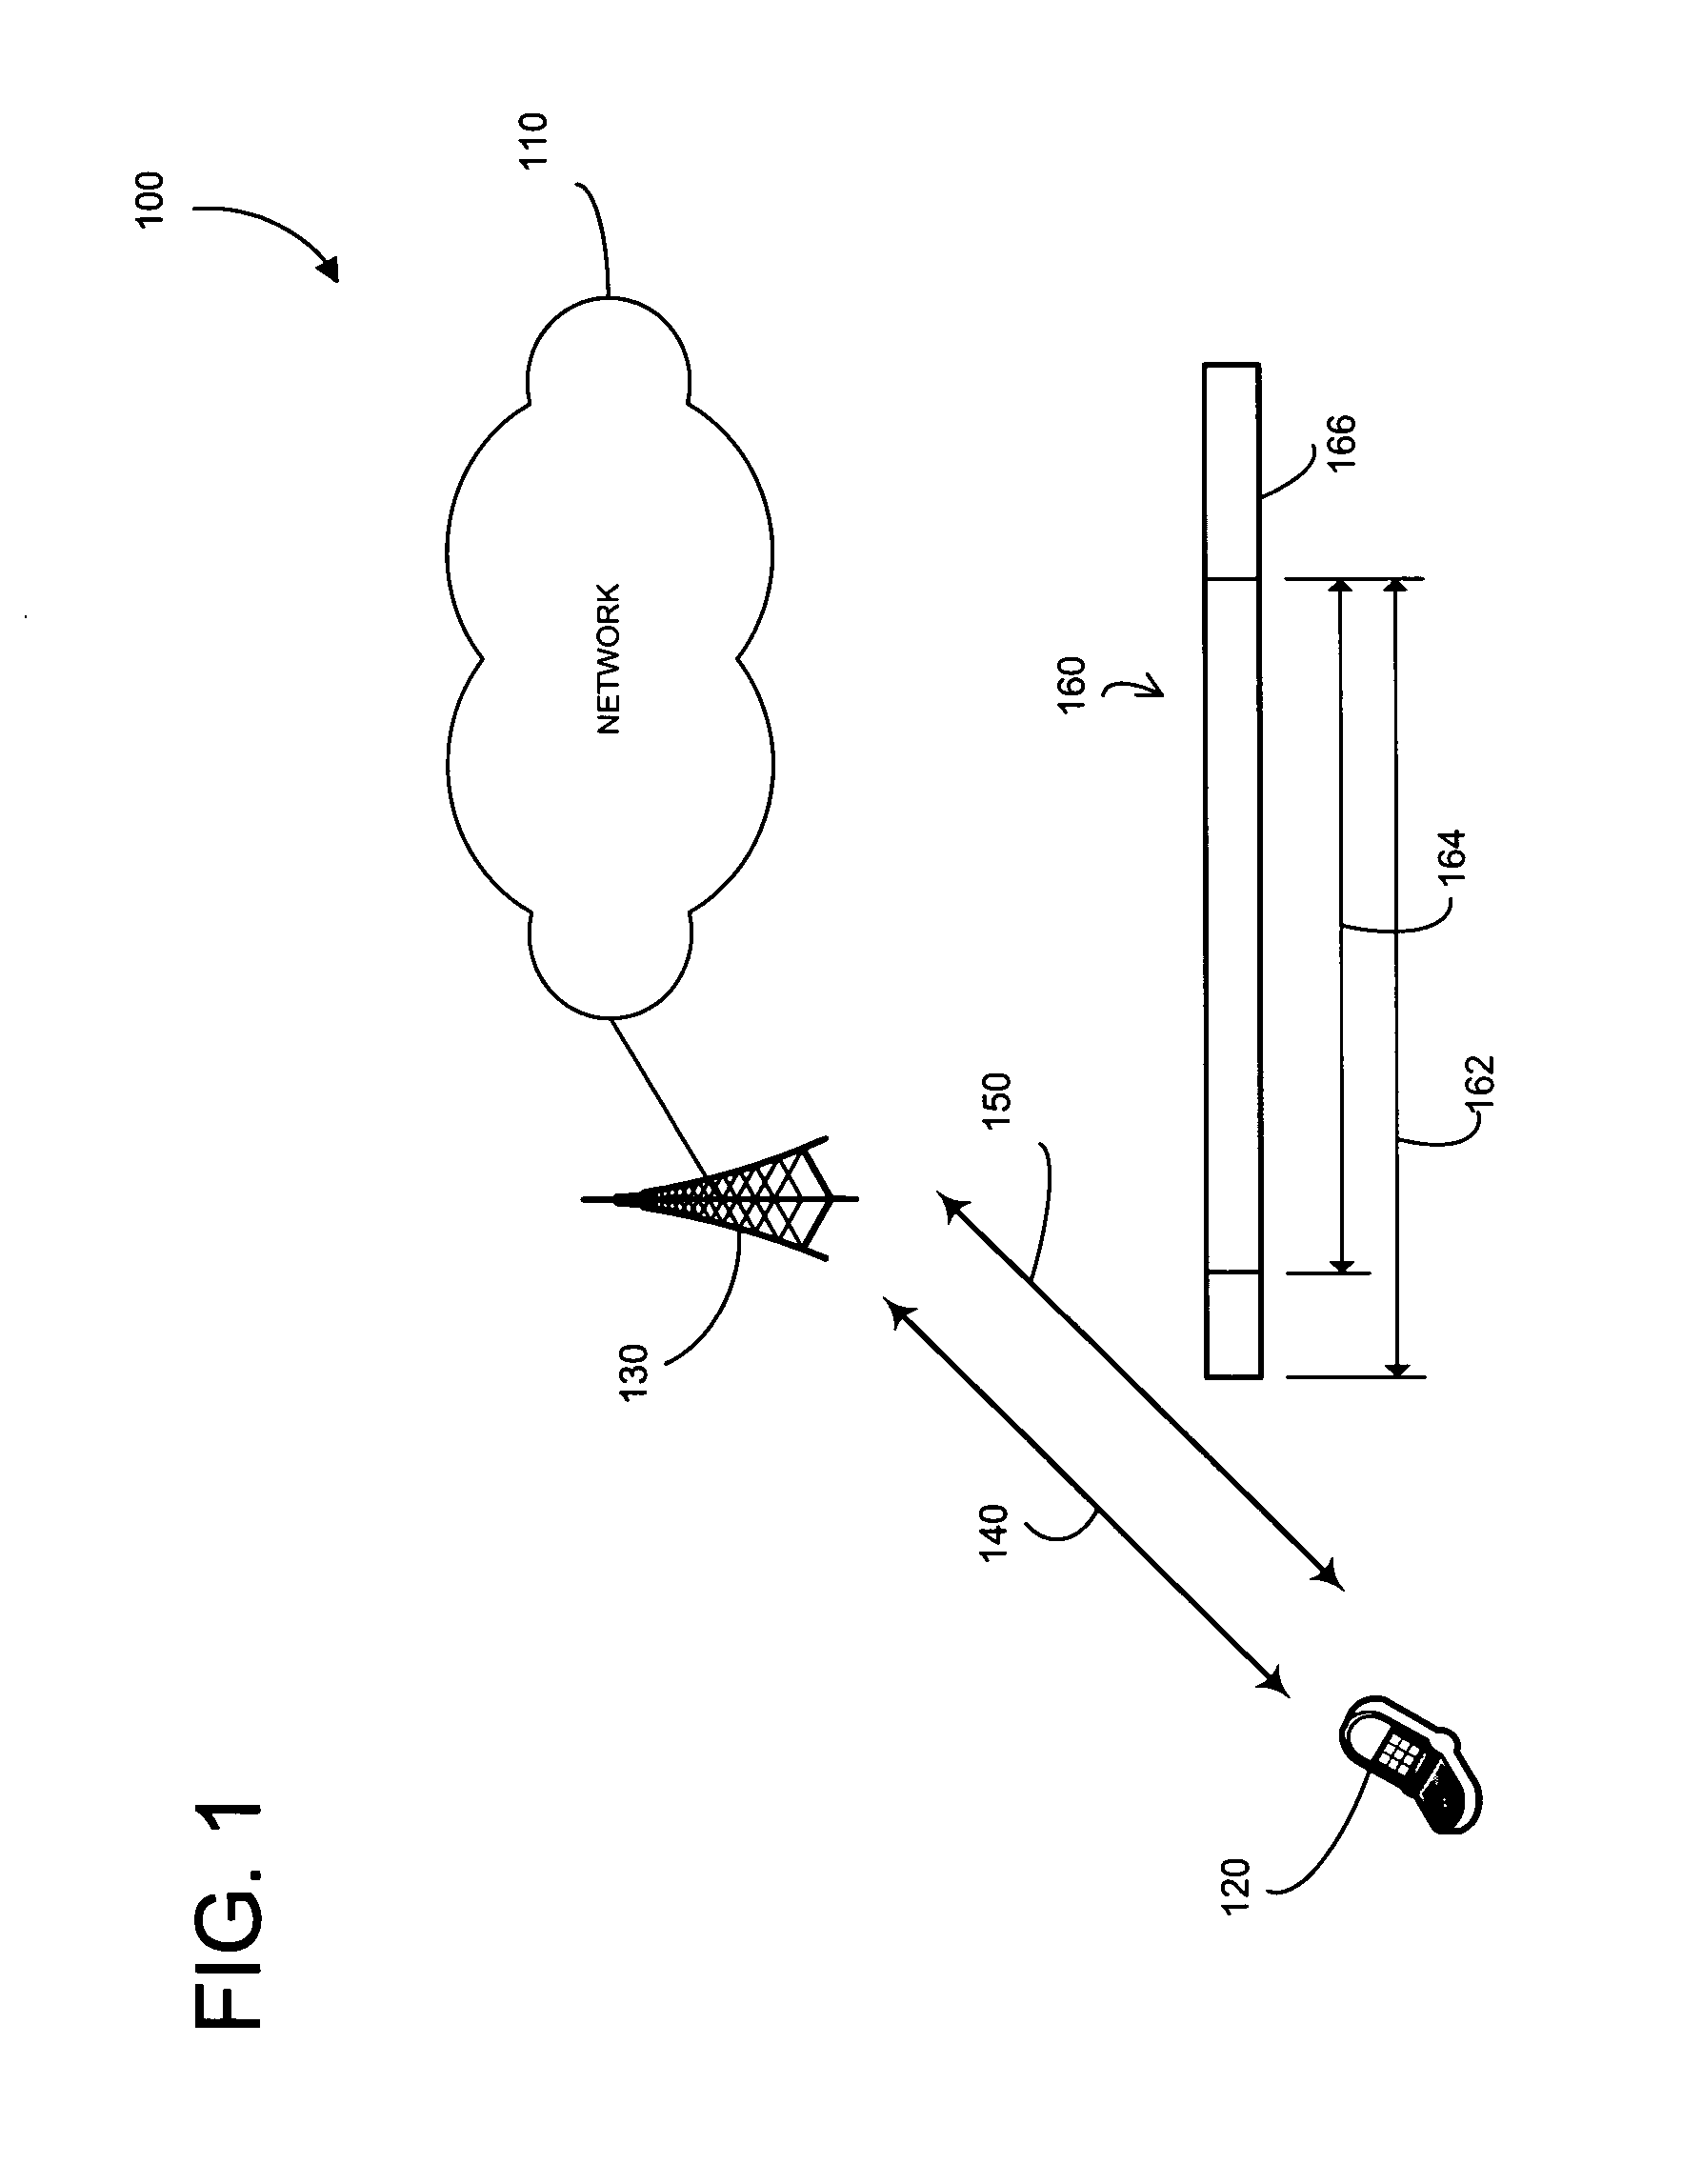 Apparatus and method for decoding a received message with a priori information